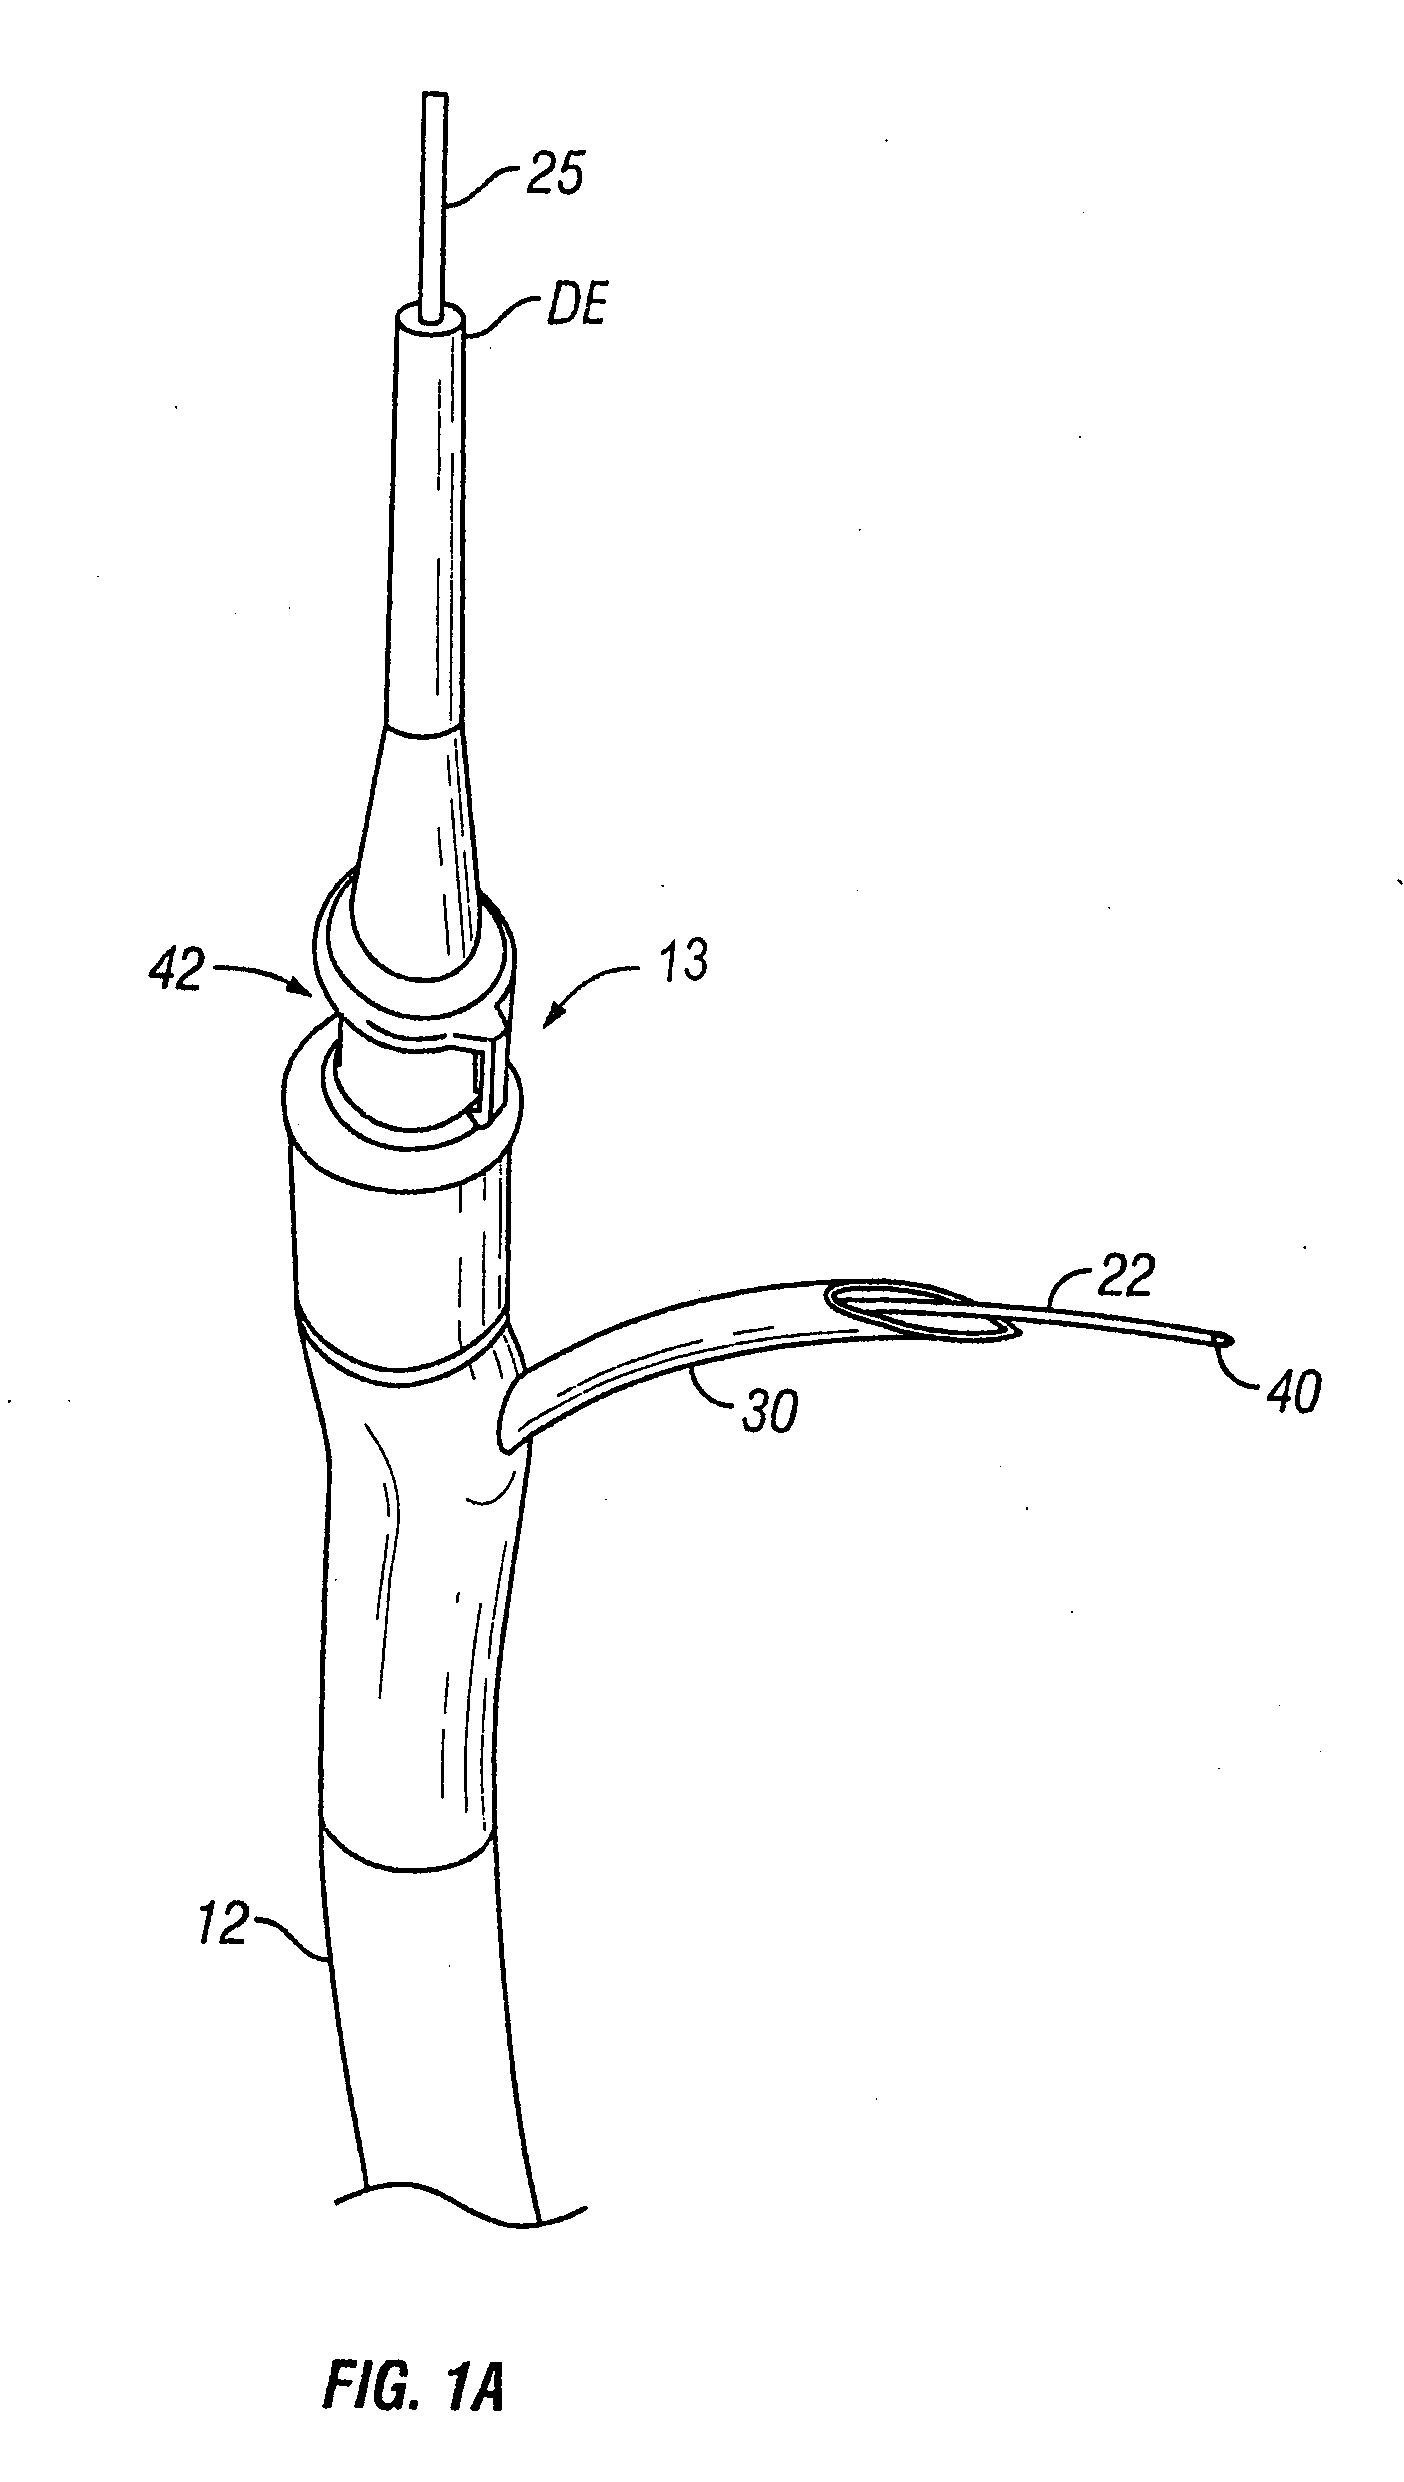 Guidewires and Delivery Catheters Having Fiber Optic Sensing Components and Related Systems and Methods